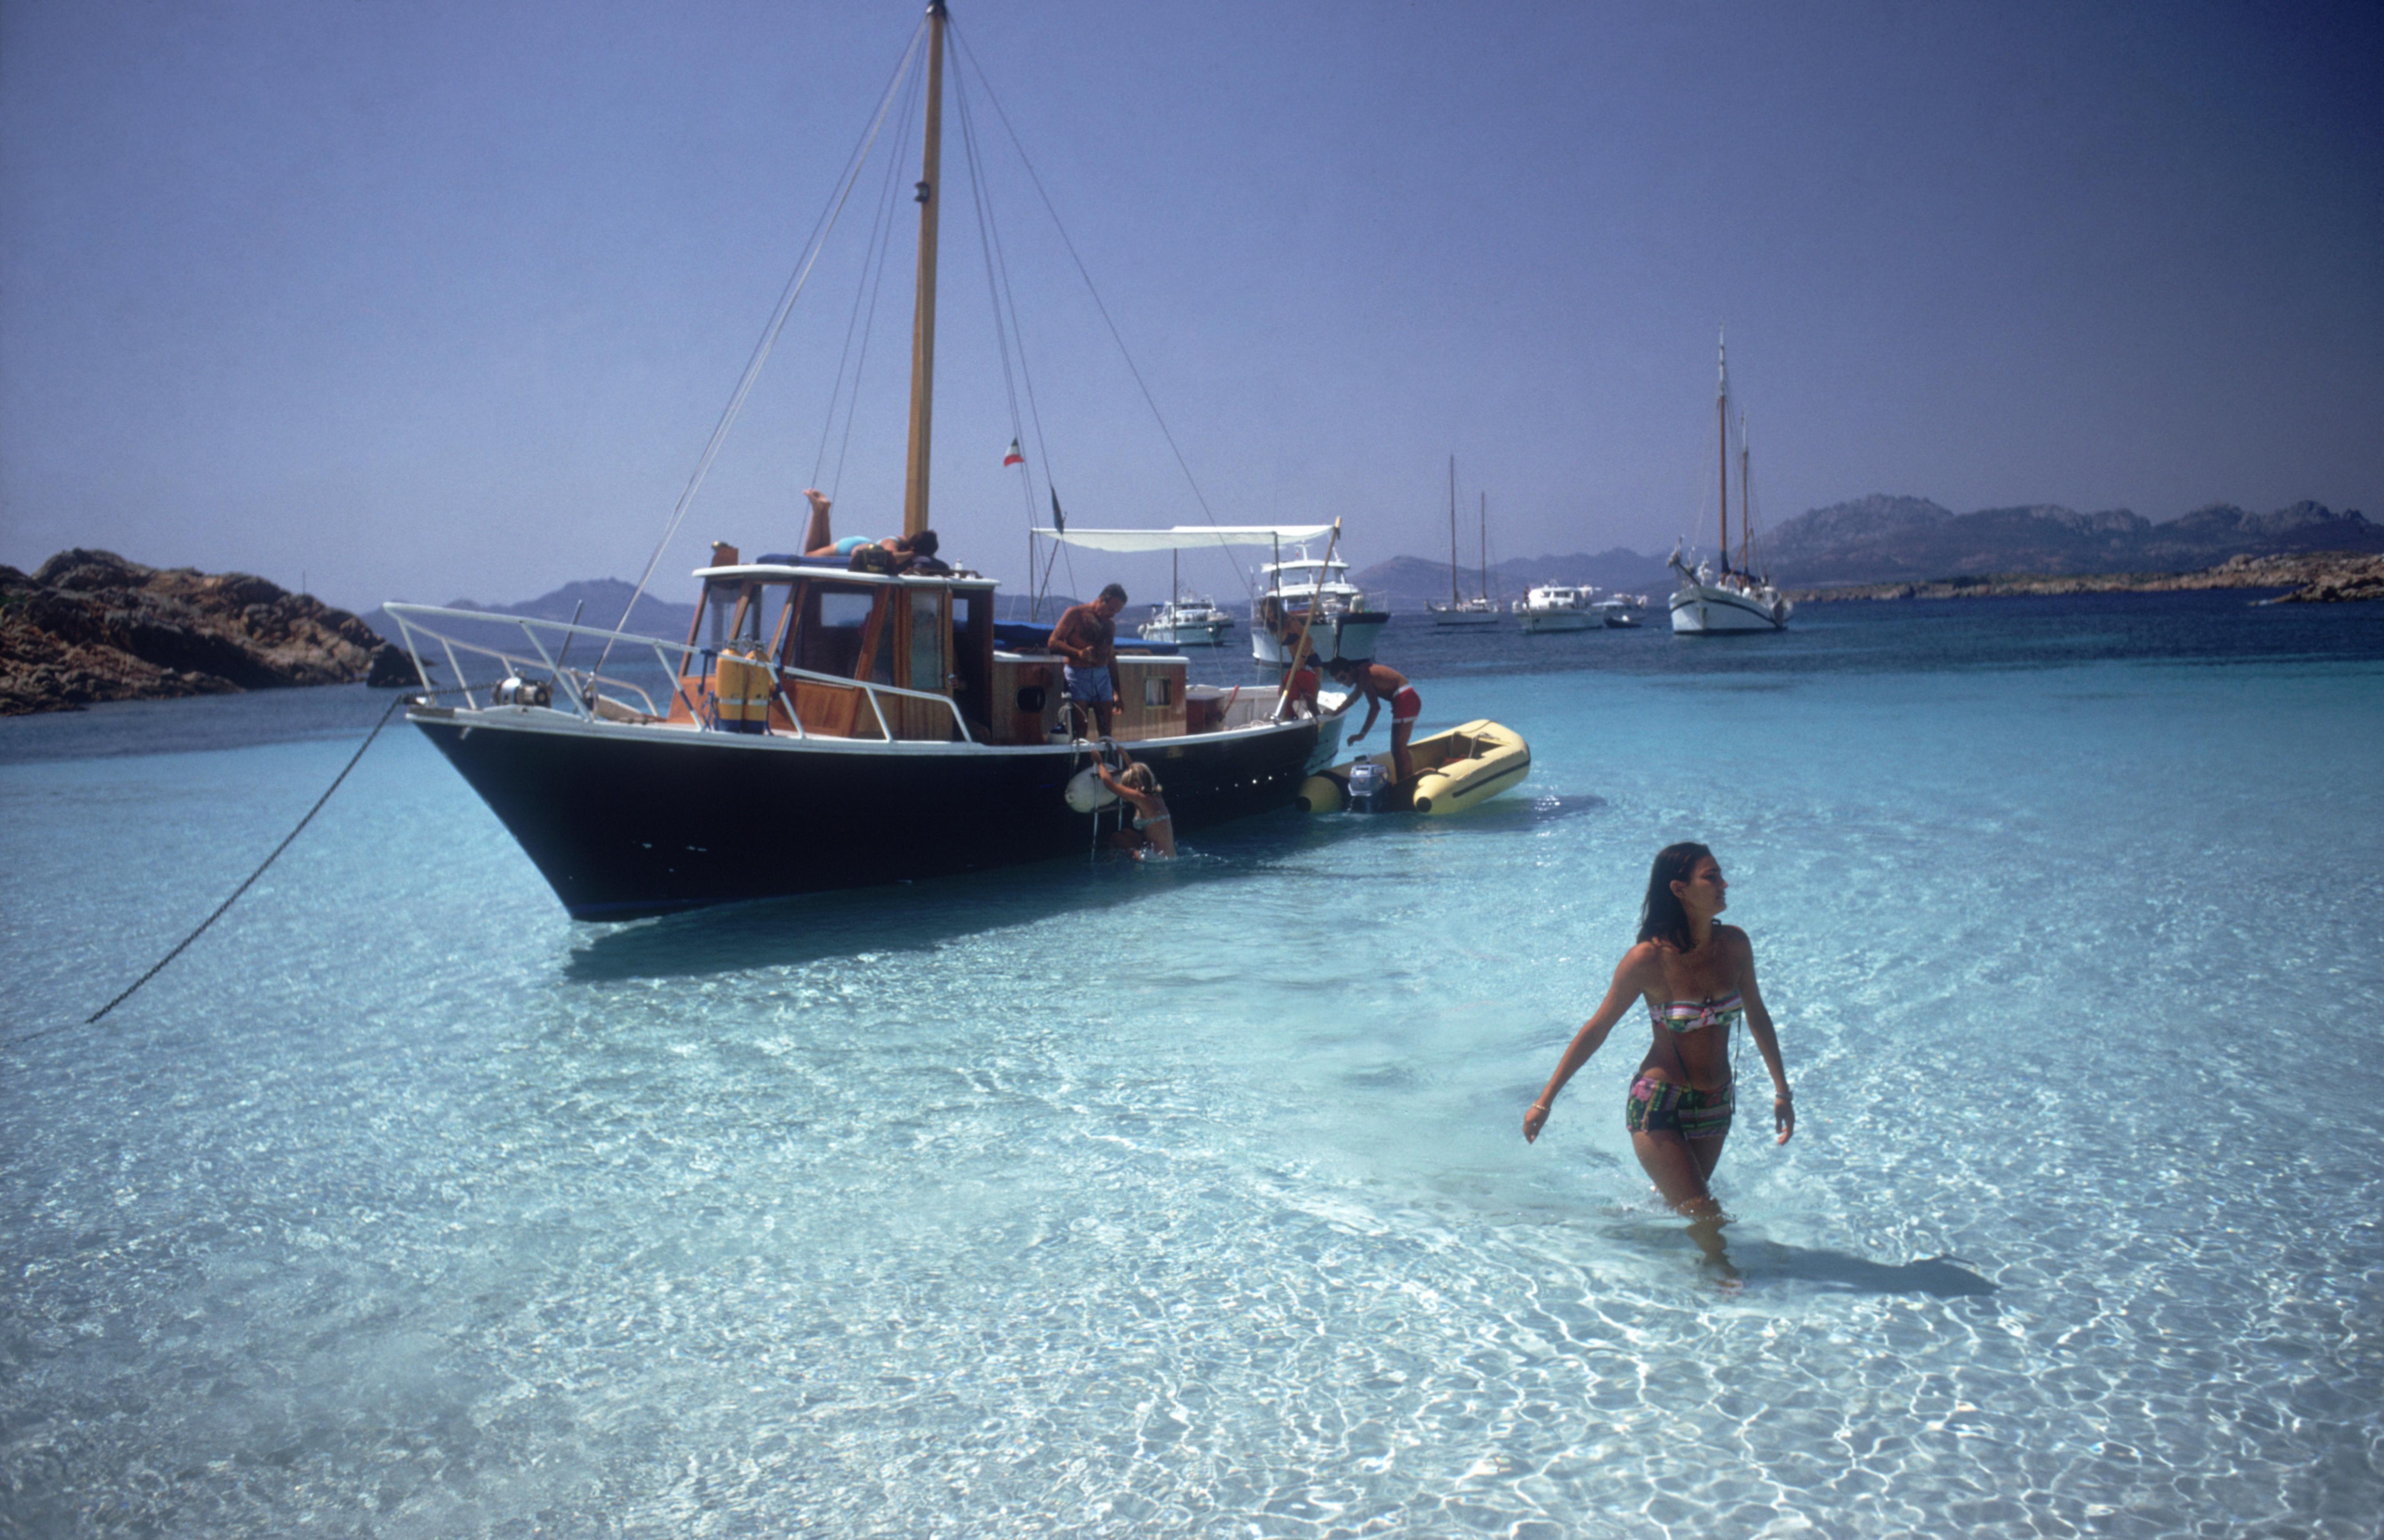 'Yachting Trip' 1967 Slim Aarons Limited Estate Edition

Selvaggia Borromeo wades ashore from her yacht during a holiday on the Costa Smeralda in Sardinia, August 1967. 

Produced from the original transparency
Certificate of authenticity supplied